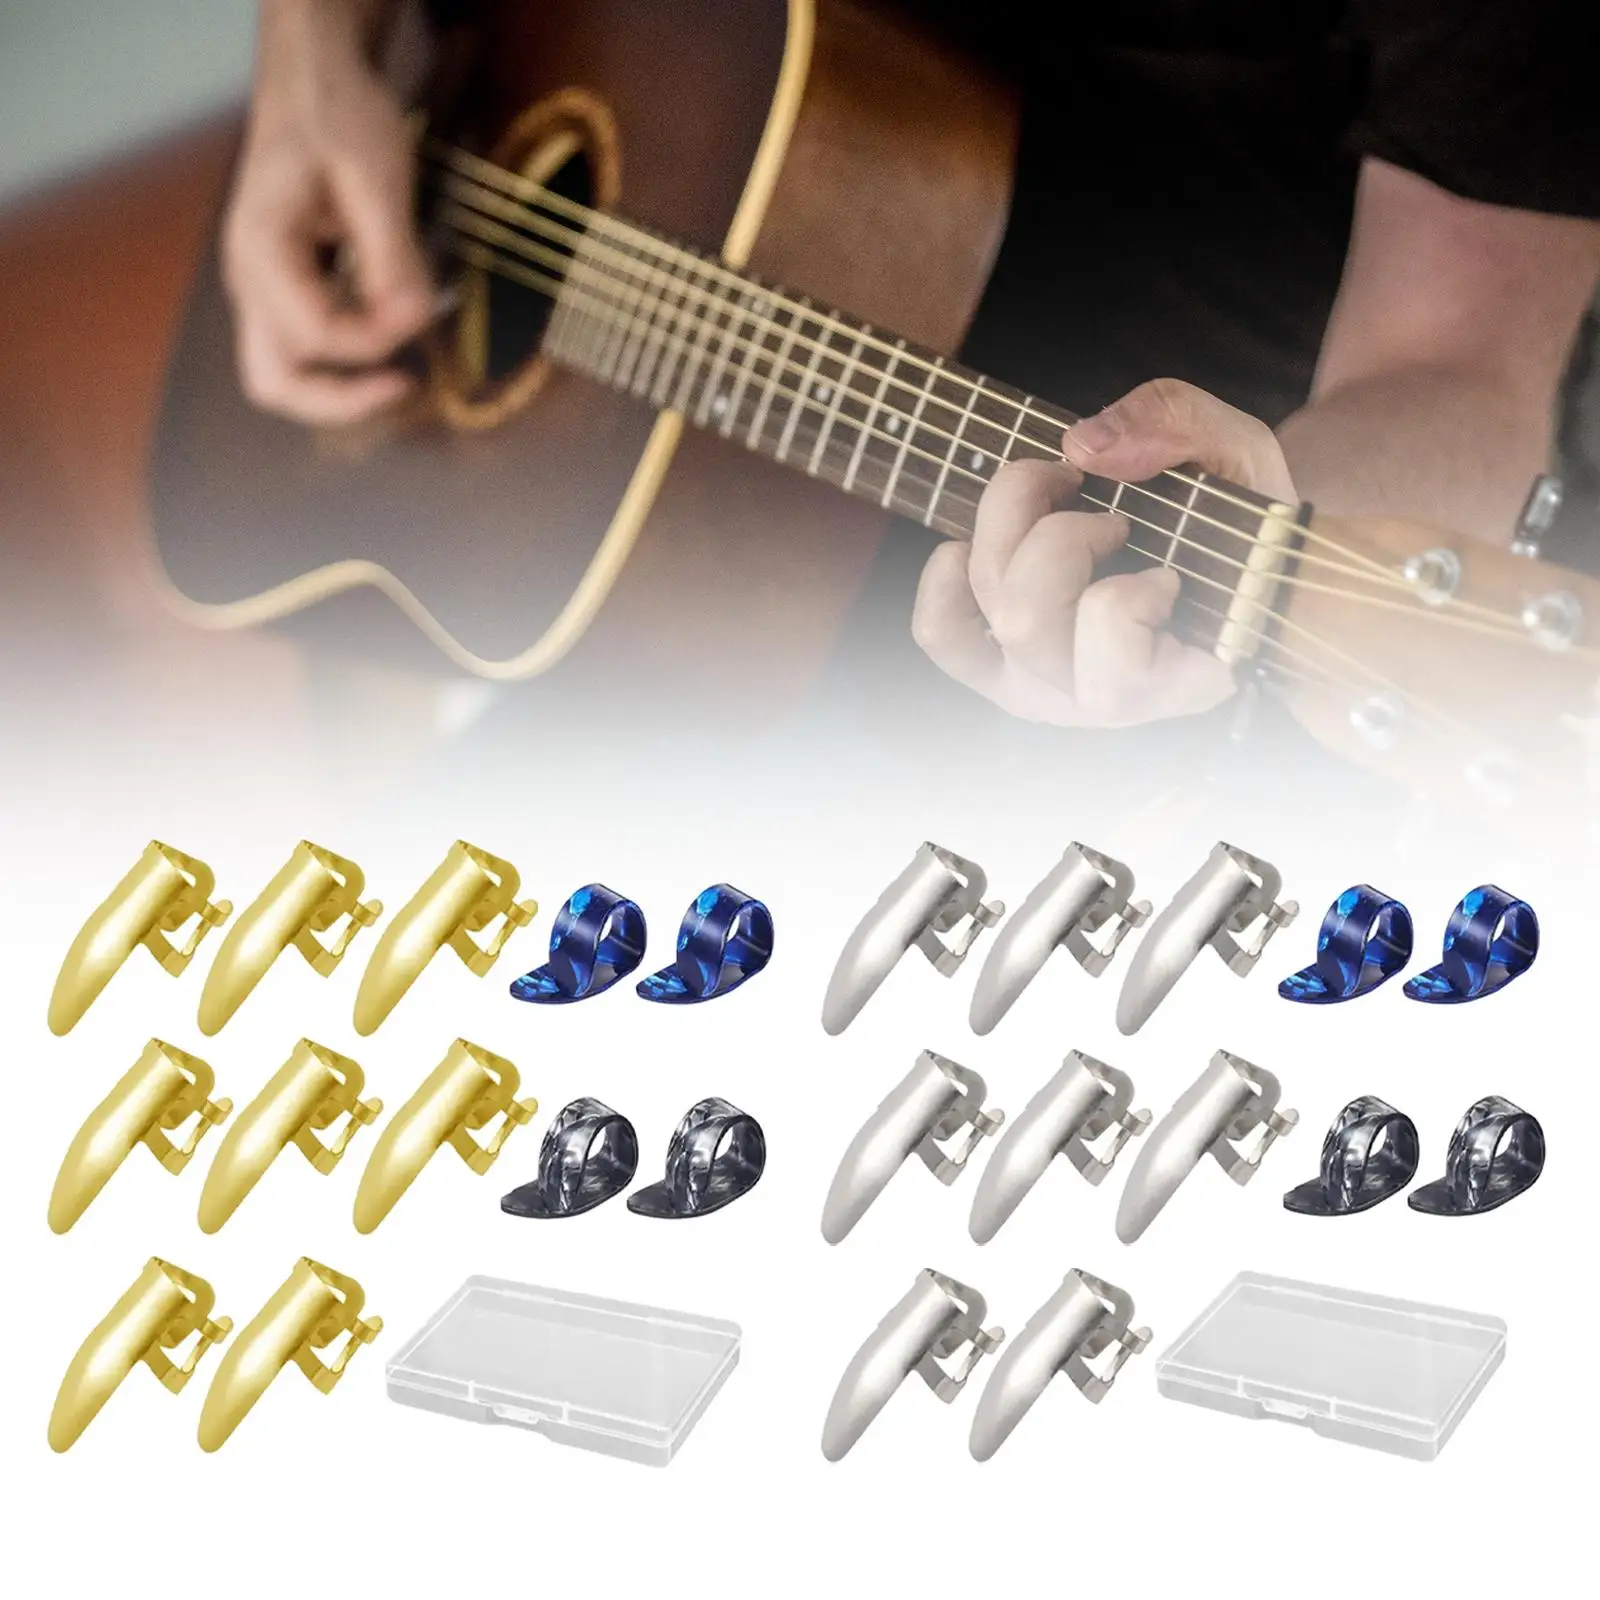 Thumb Pick Instrument Parts Guitar Replacement Parts Steel Finger Picks Set Guitar Finger Pick Plectrums Slide